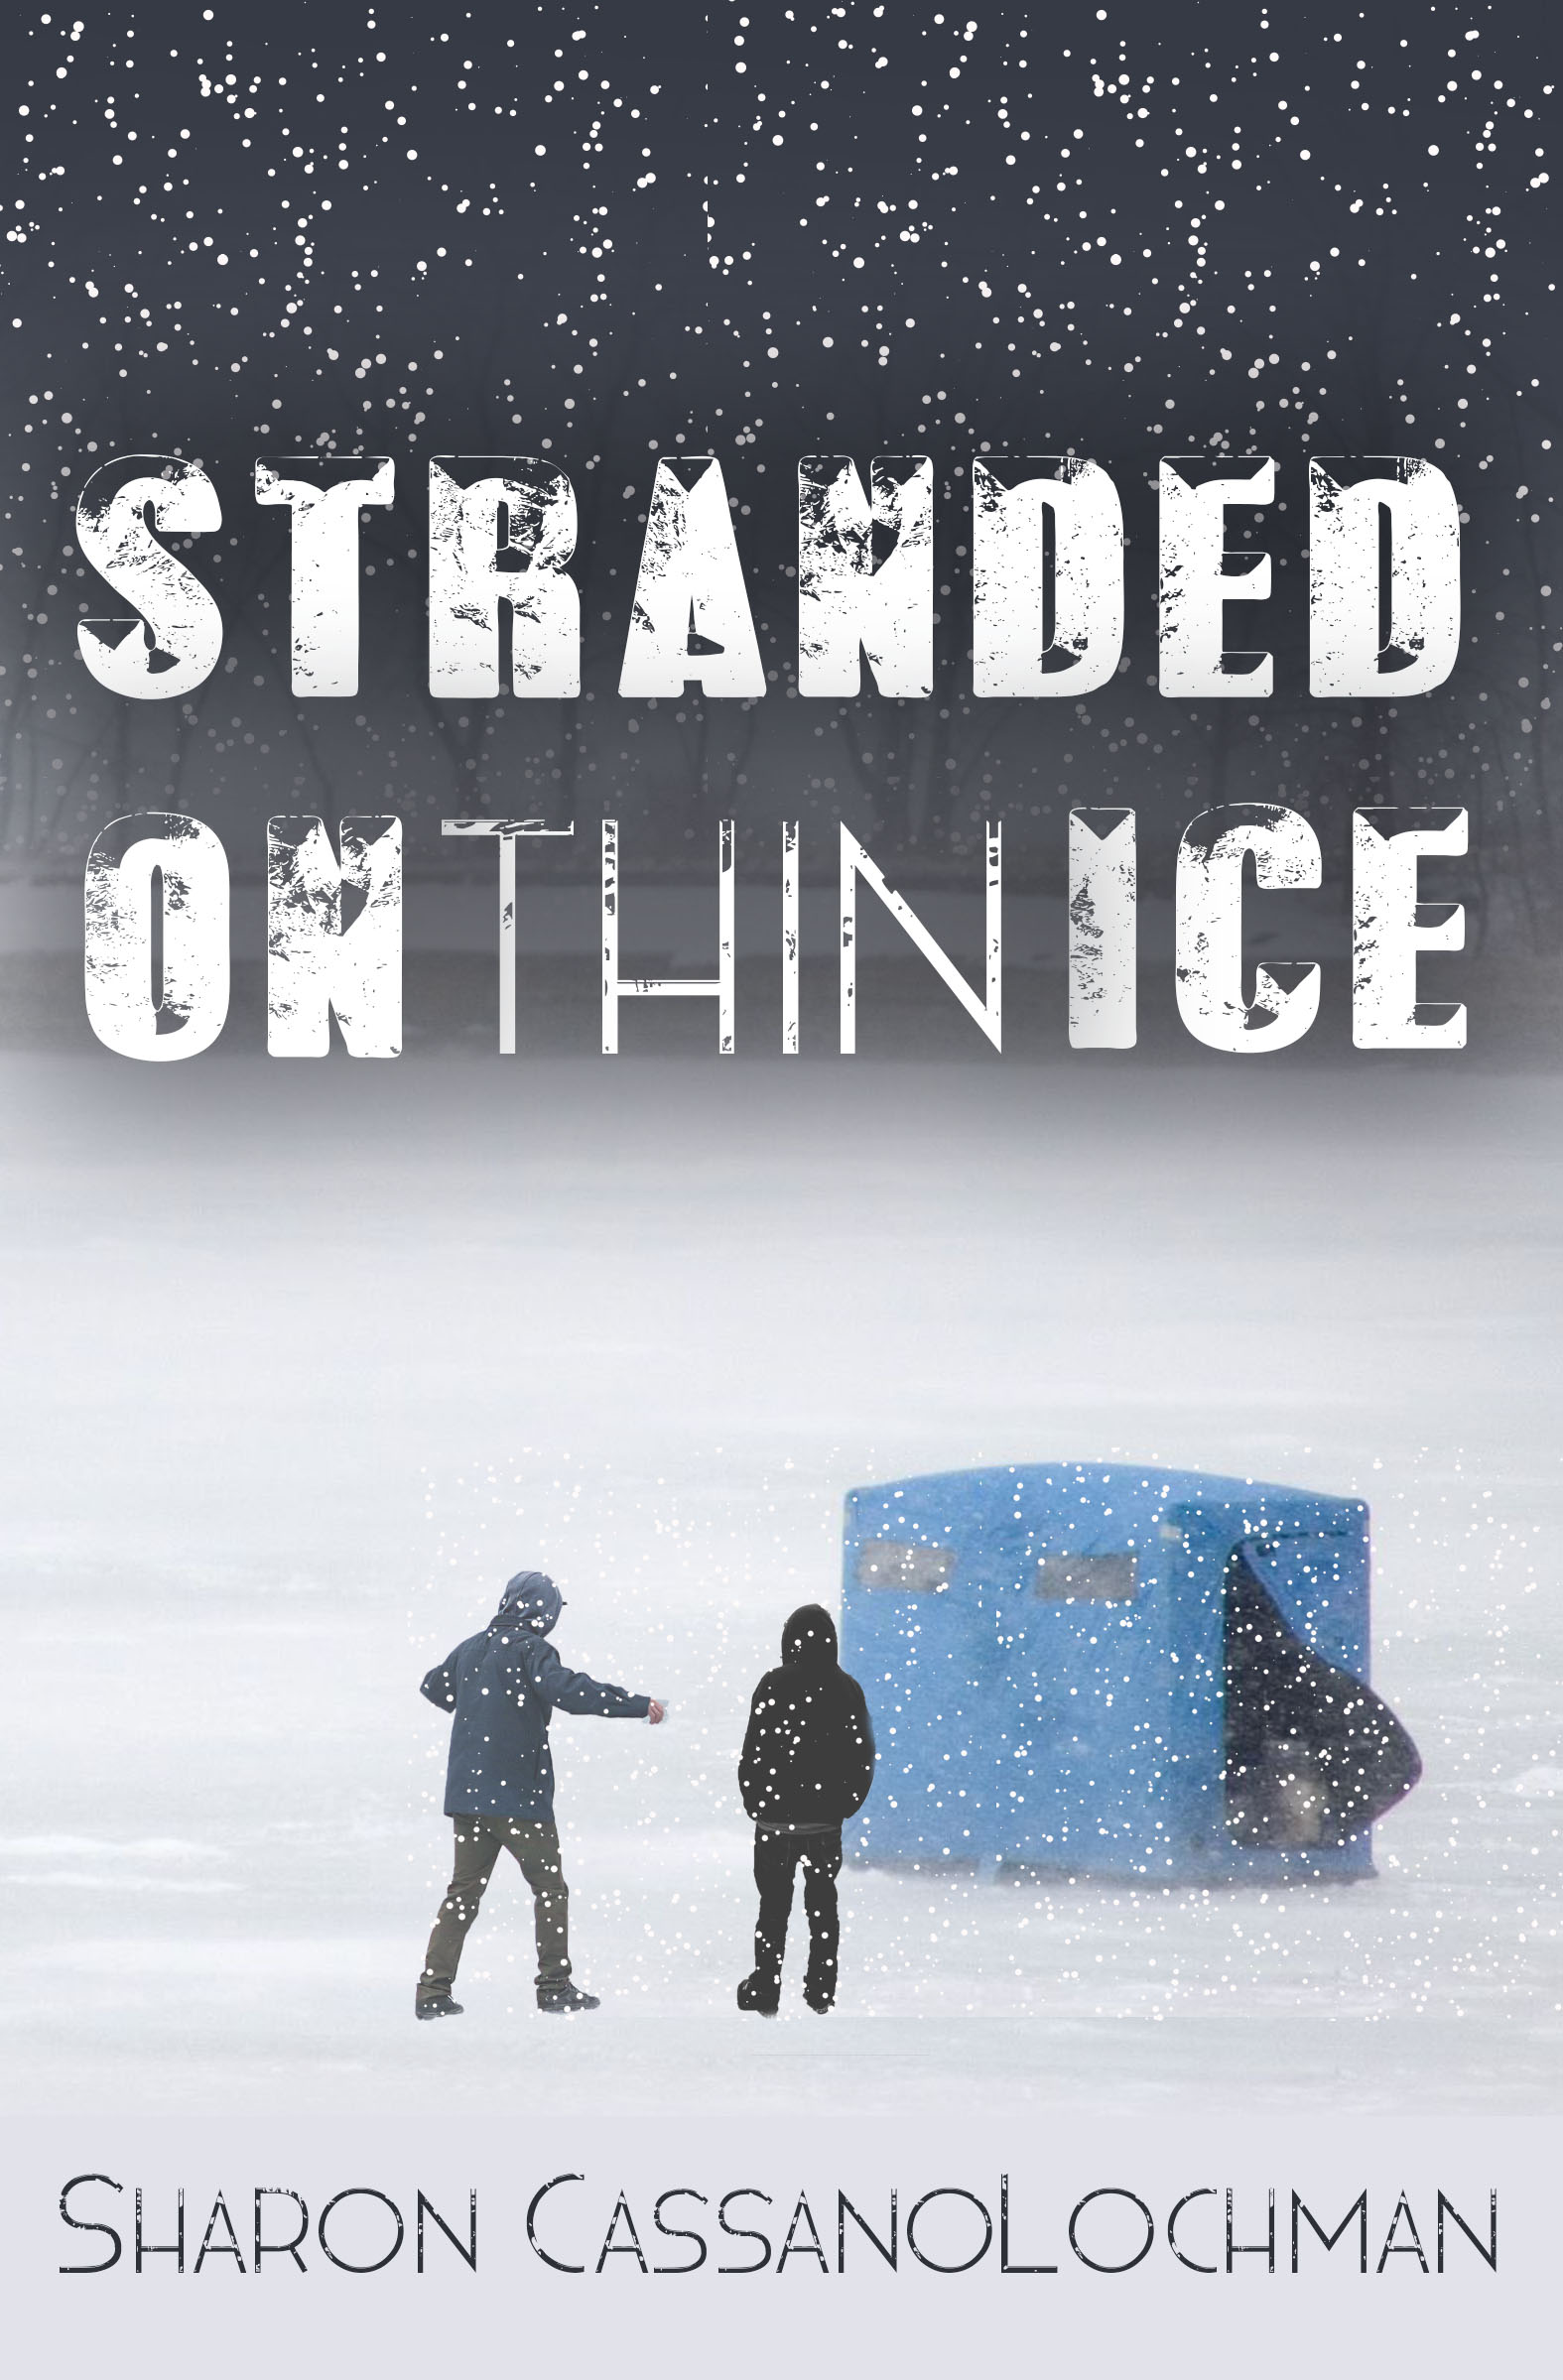 Stranded on Thin Ice